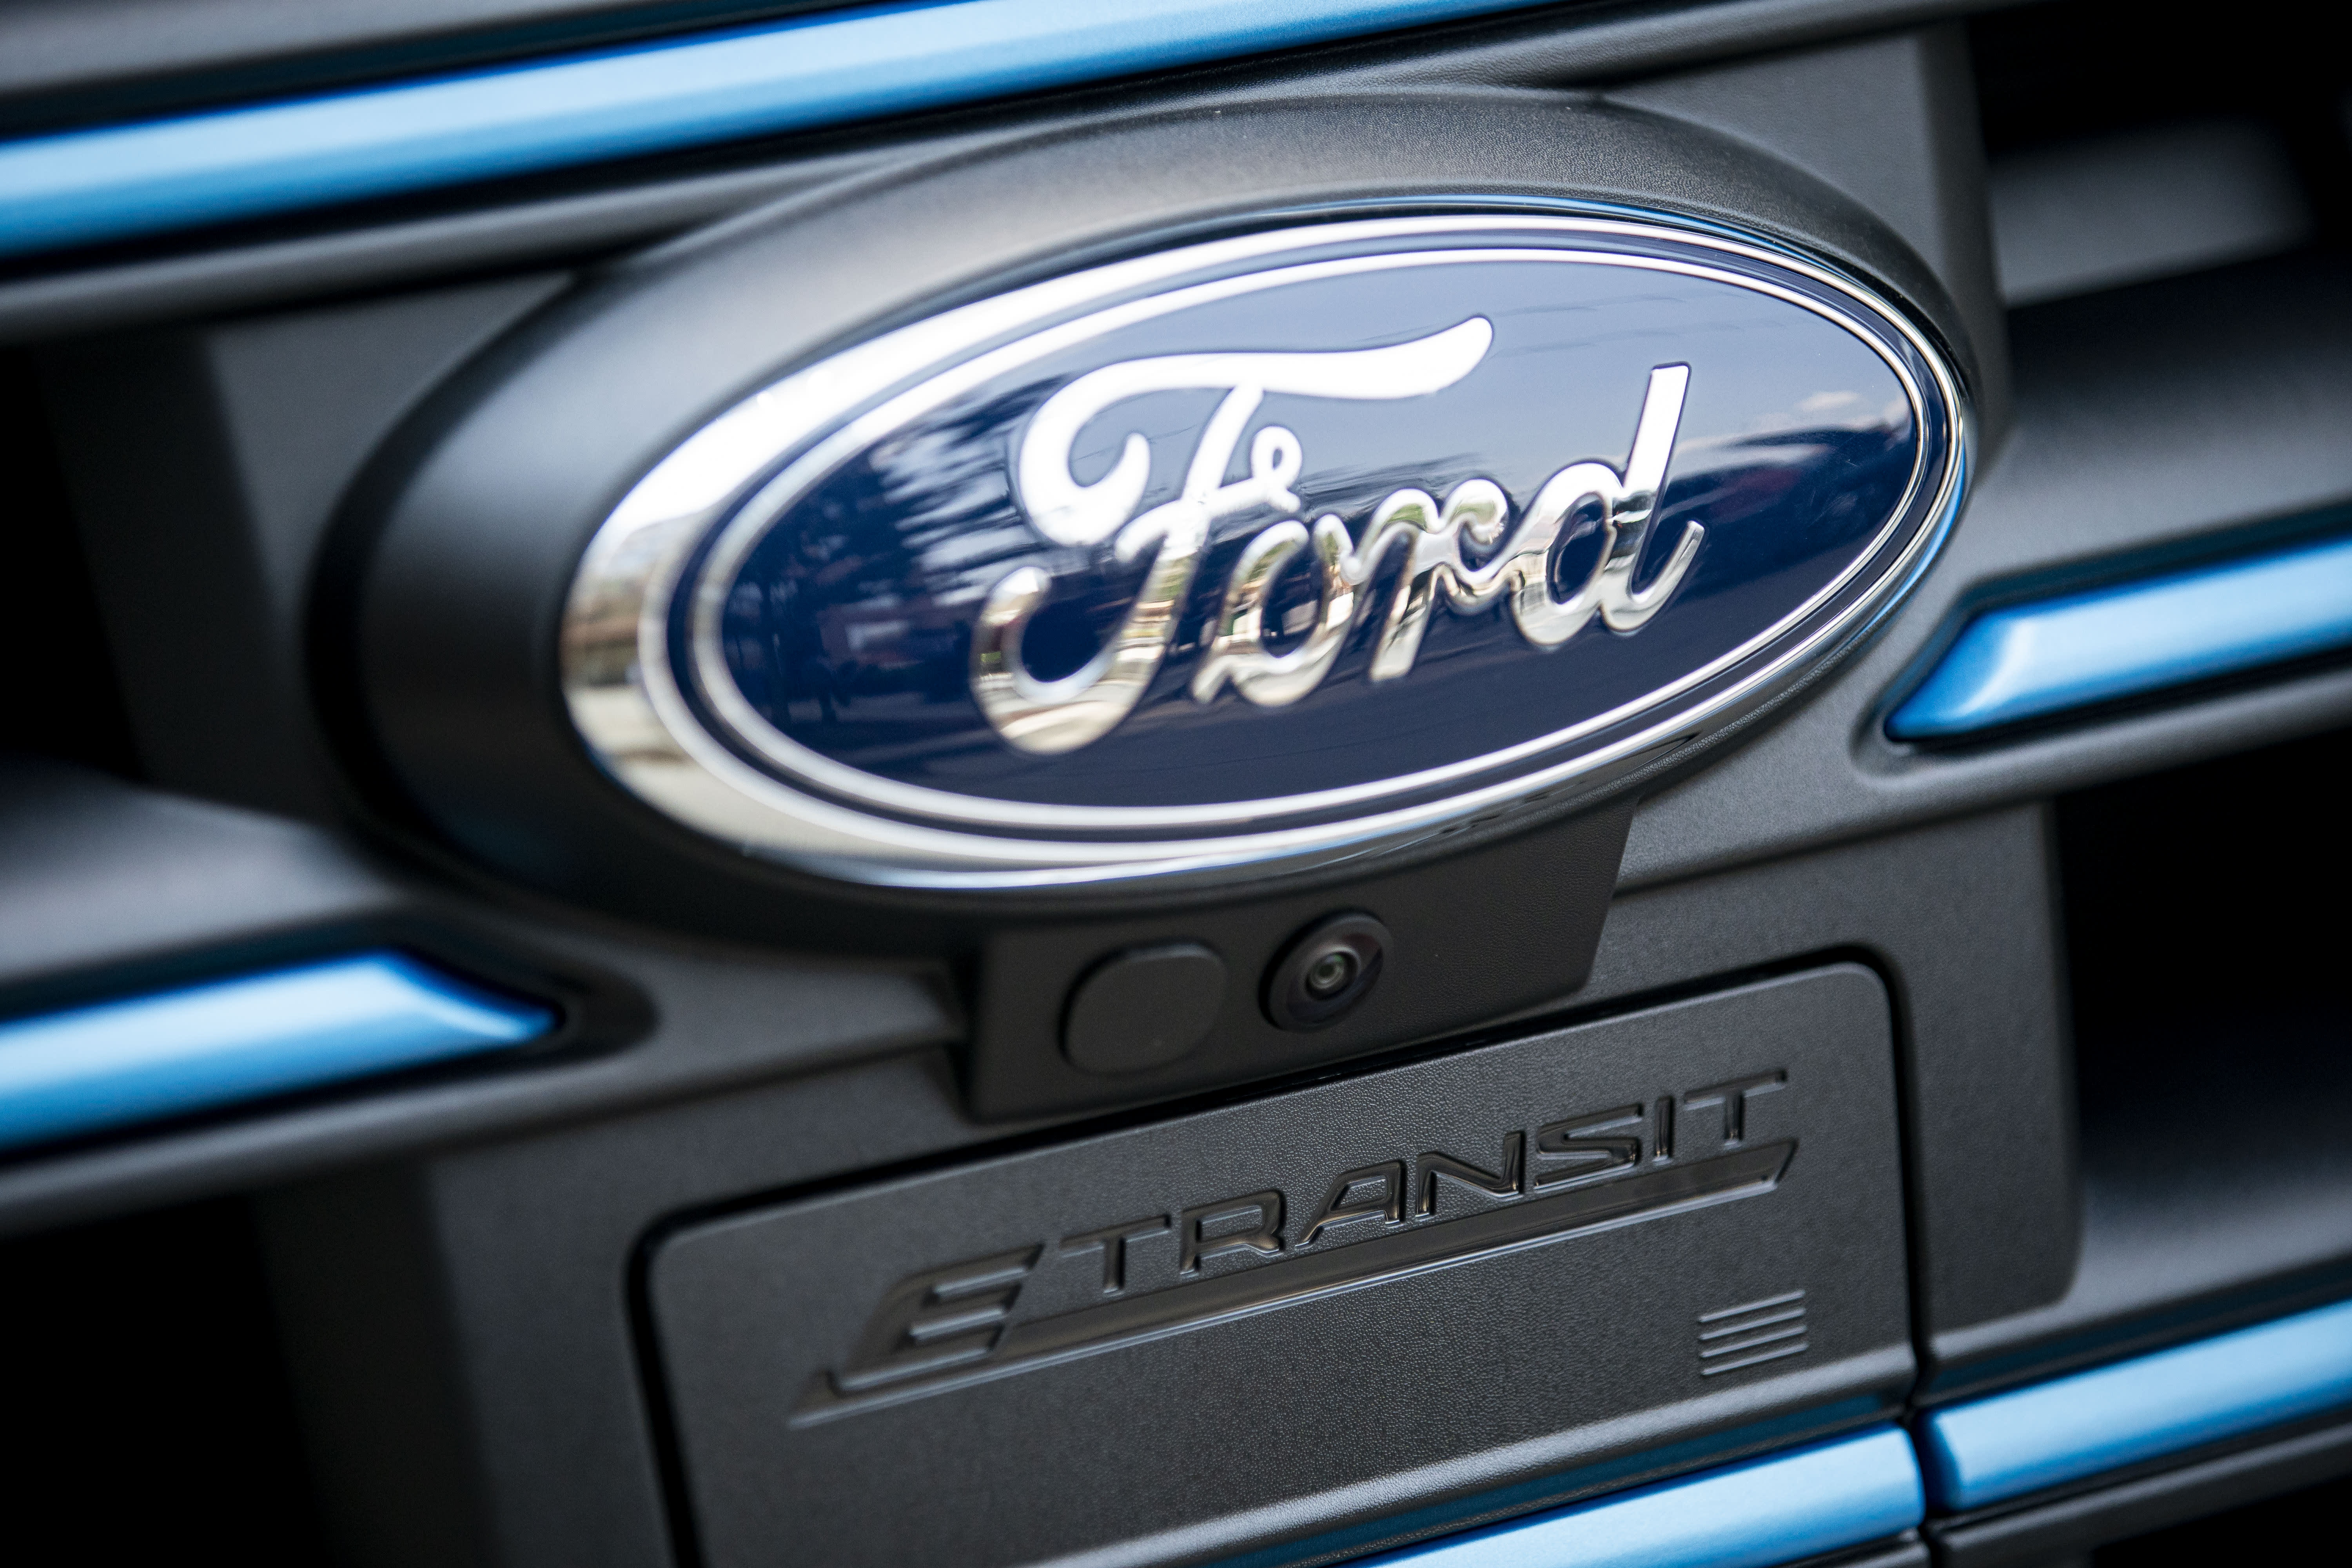 Ford is set to report results after the bell. Here’s what Wall Street expects